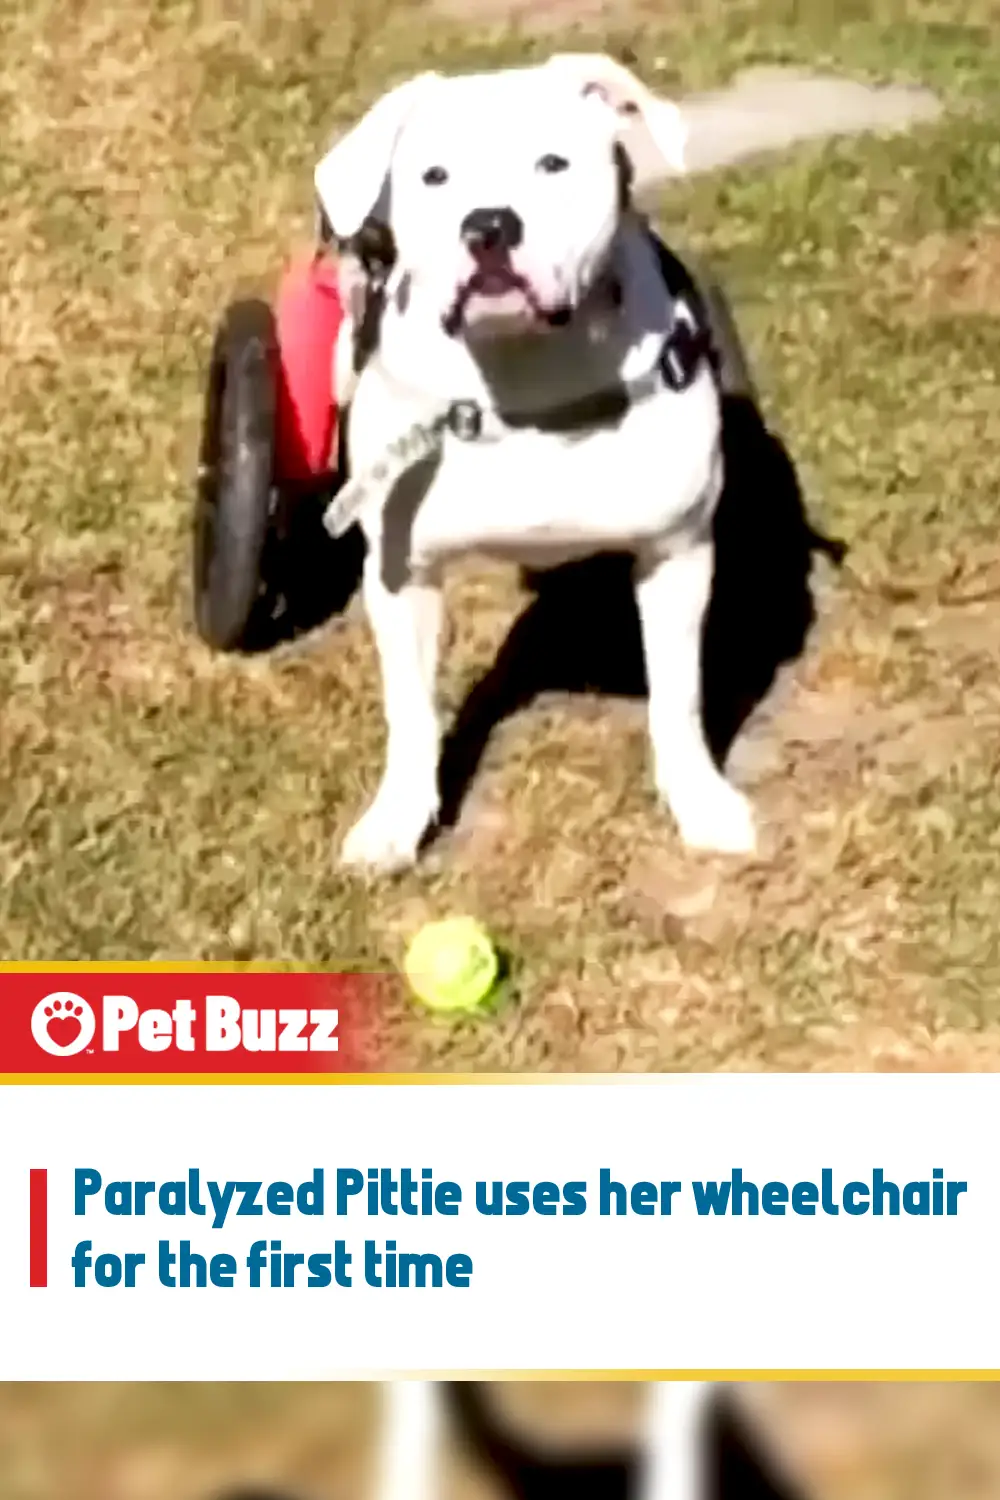 Paralyzed Pittie uses her wheelchair for the first time